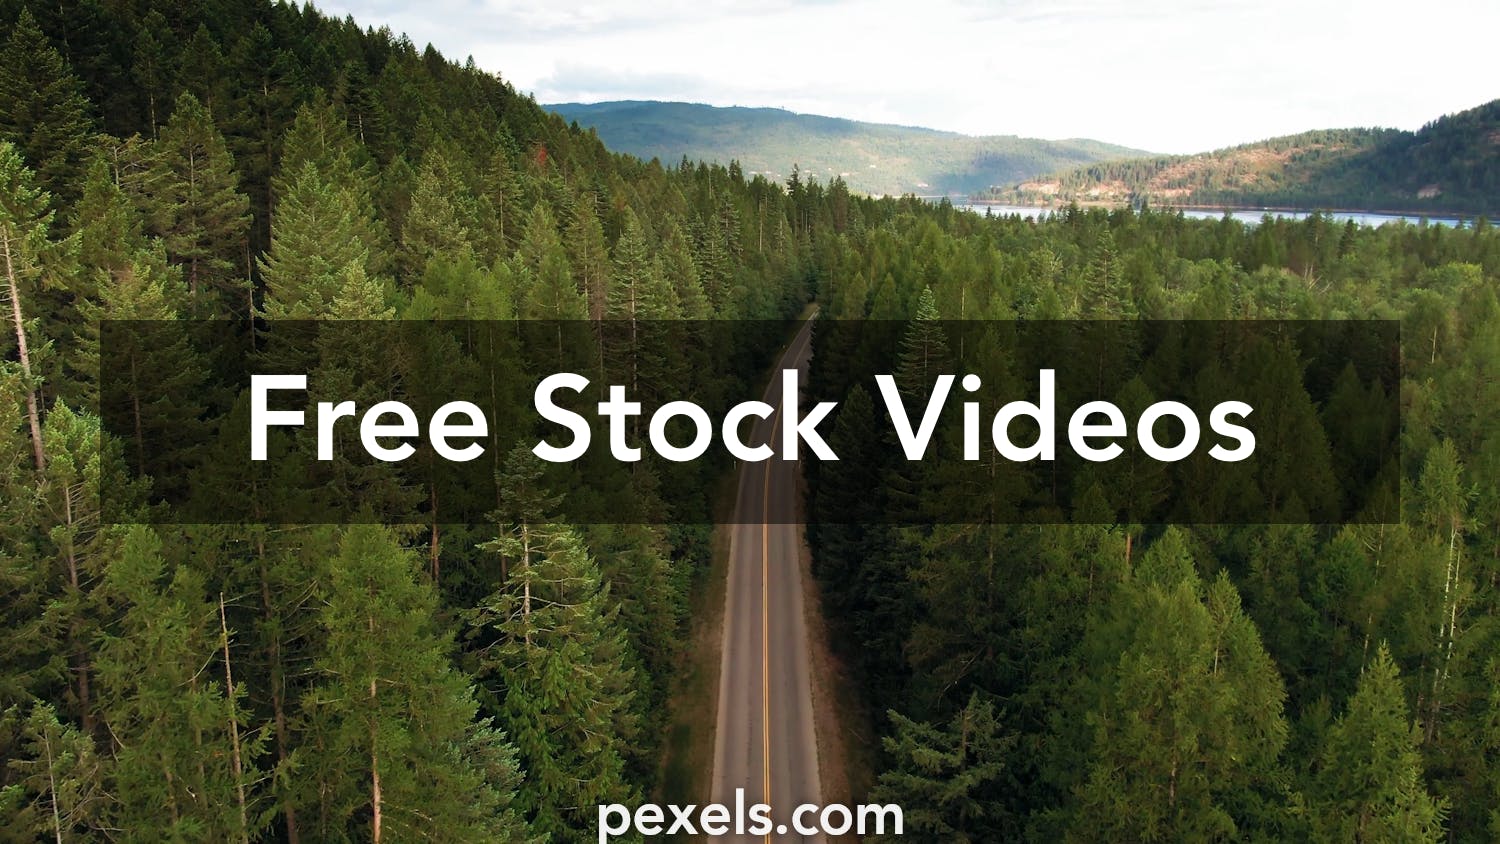 Scenery Videos, Download The BEST Free 4k Stock Video Footage & Scenery HD Video  Clips